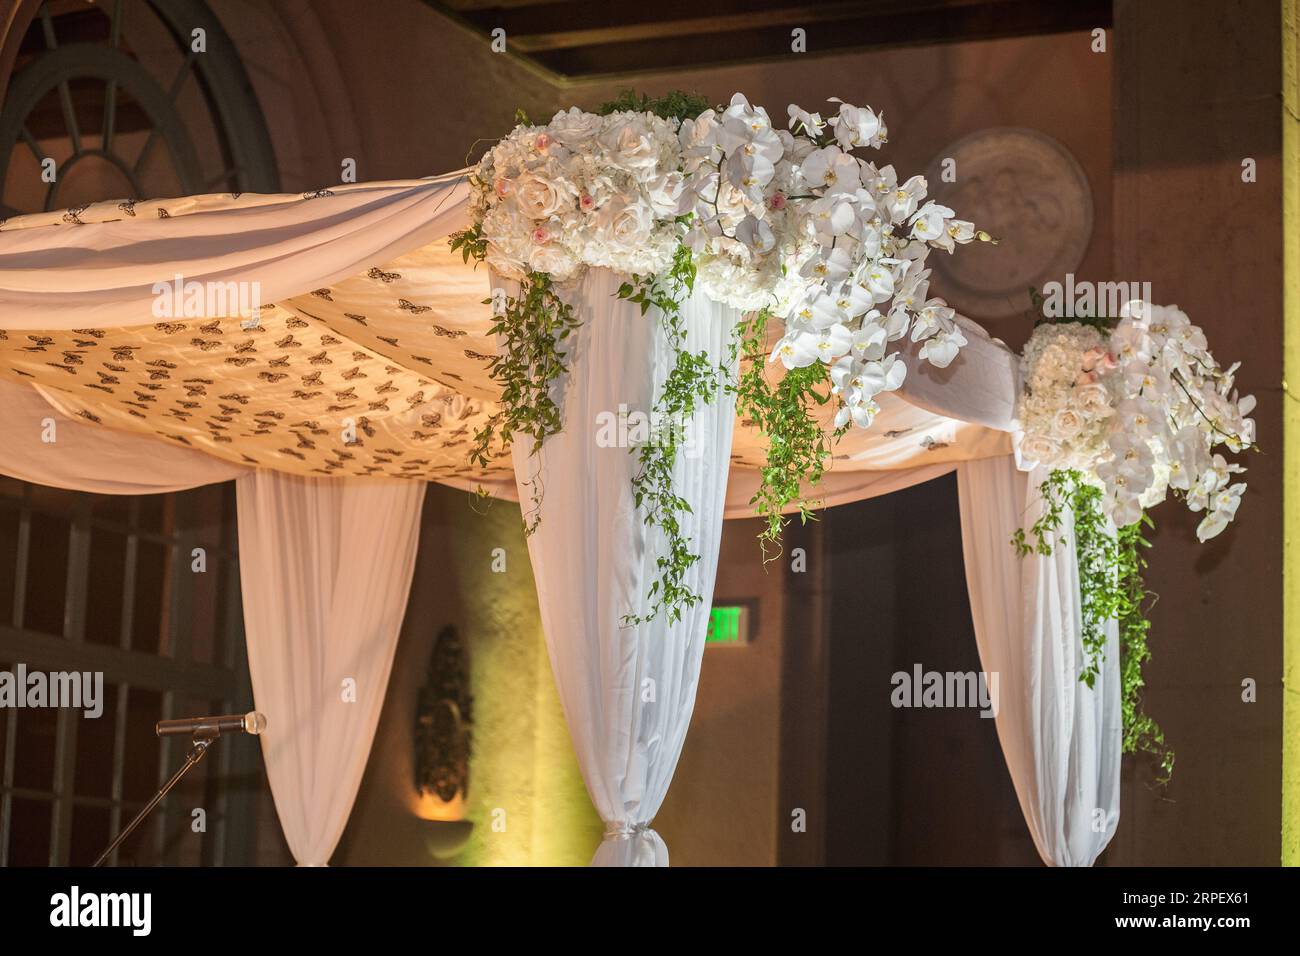 An outdoor wedding venue featuring a floral-covered canopy adorned with curtains and drapes for a romantic and elegant atmosphere Stock Photo